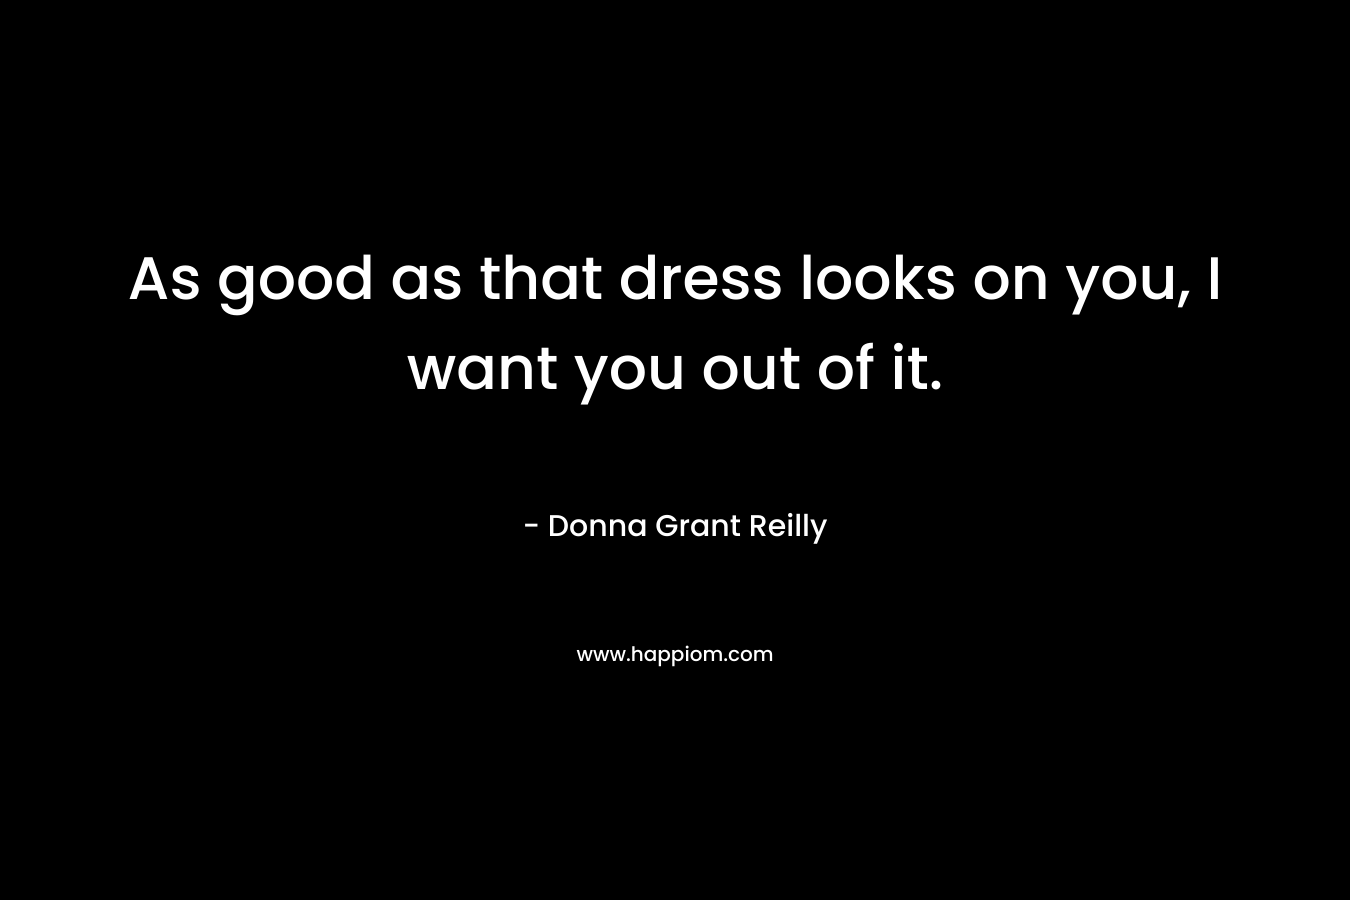 As good as that dress looks on you, I want you out of it. – Donna Grant Reilly